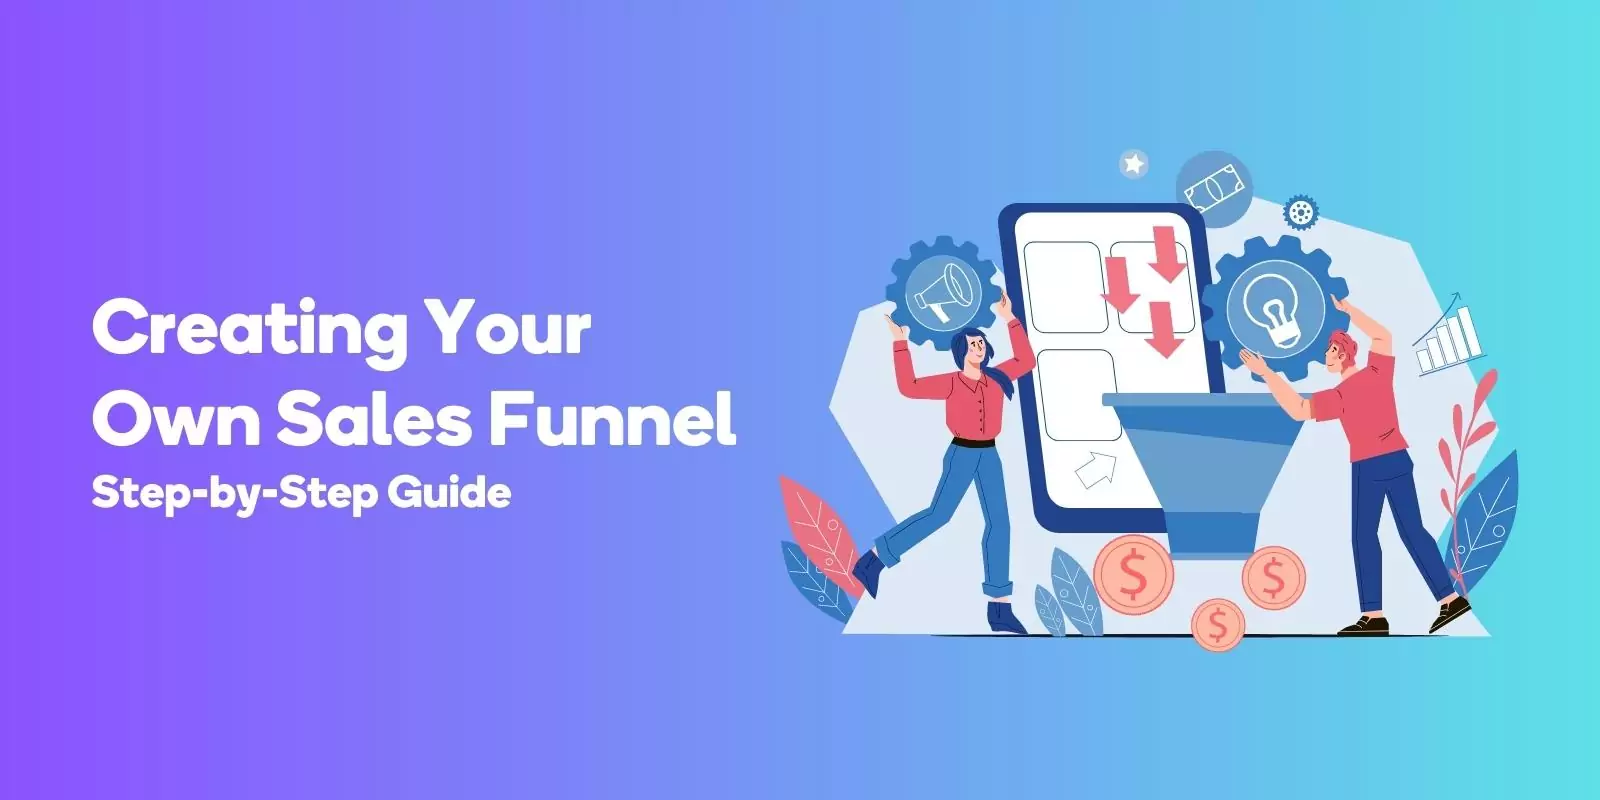 Creating Your Own Sales Funnel Step-by-Step Guide